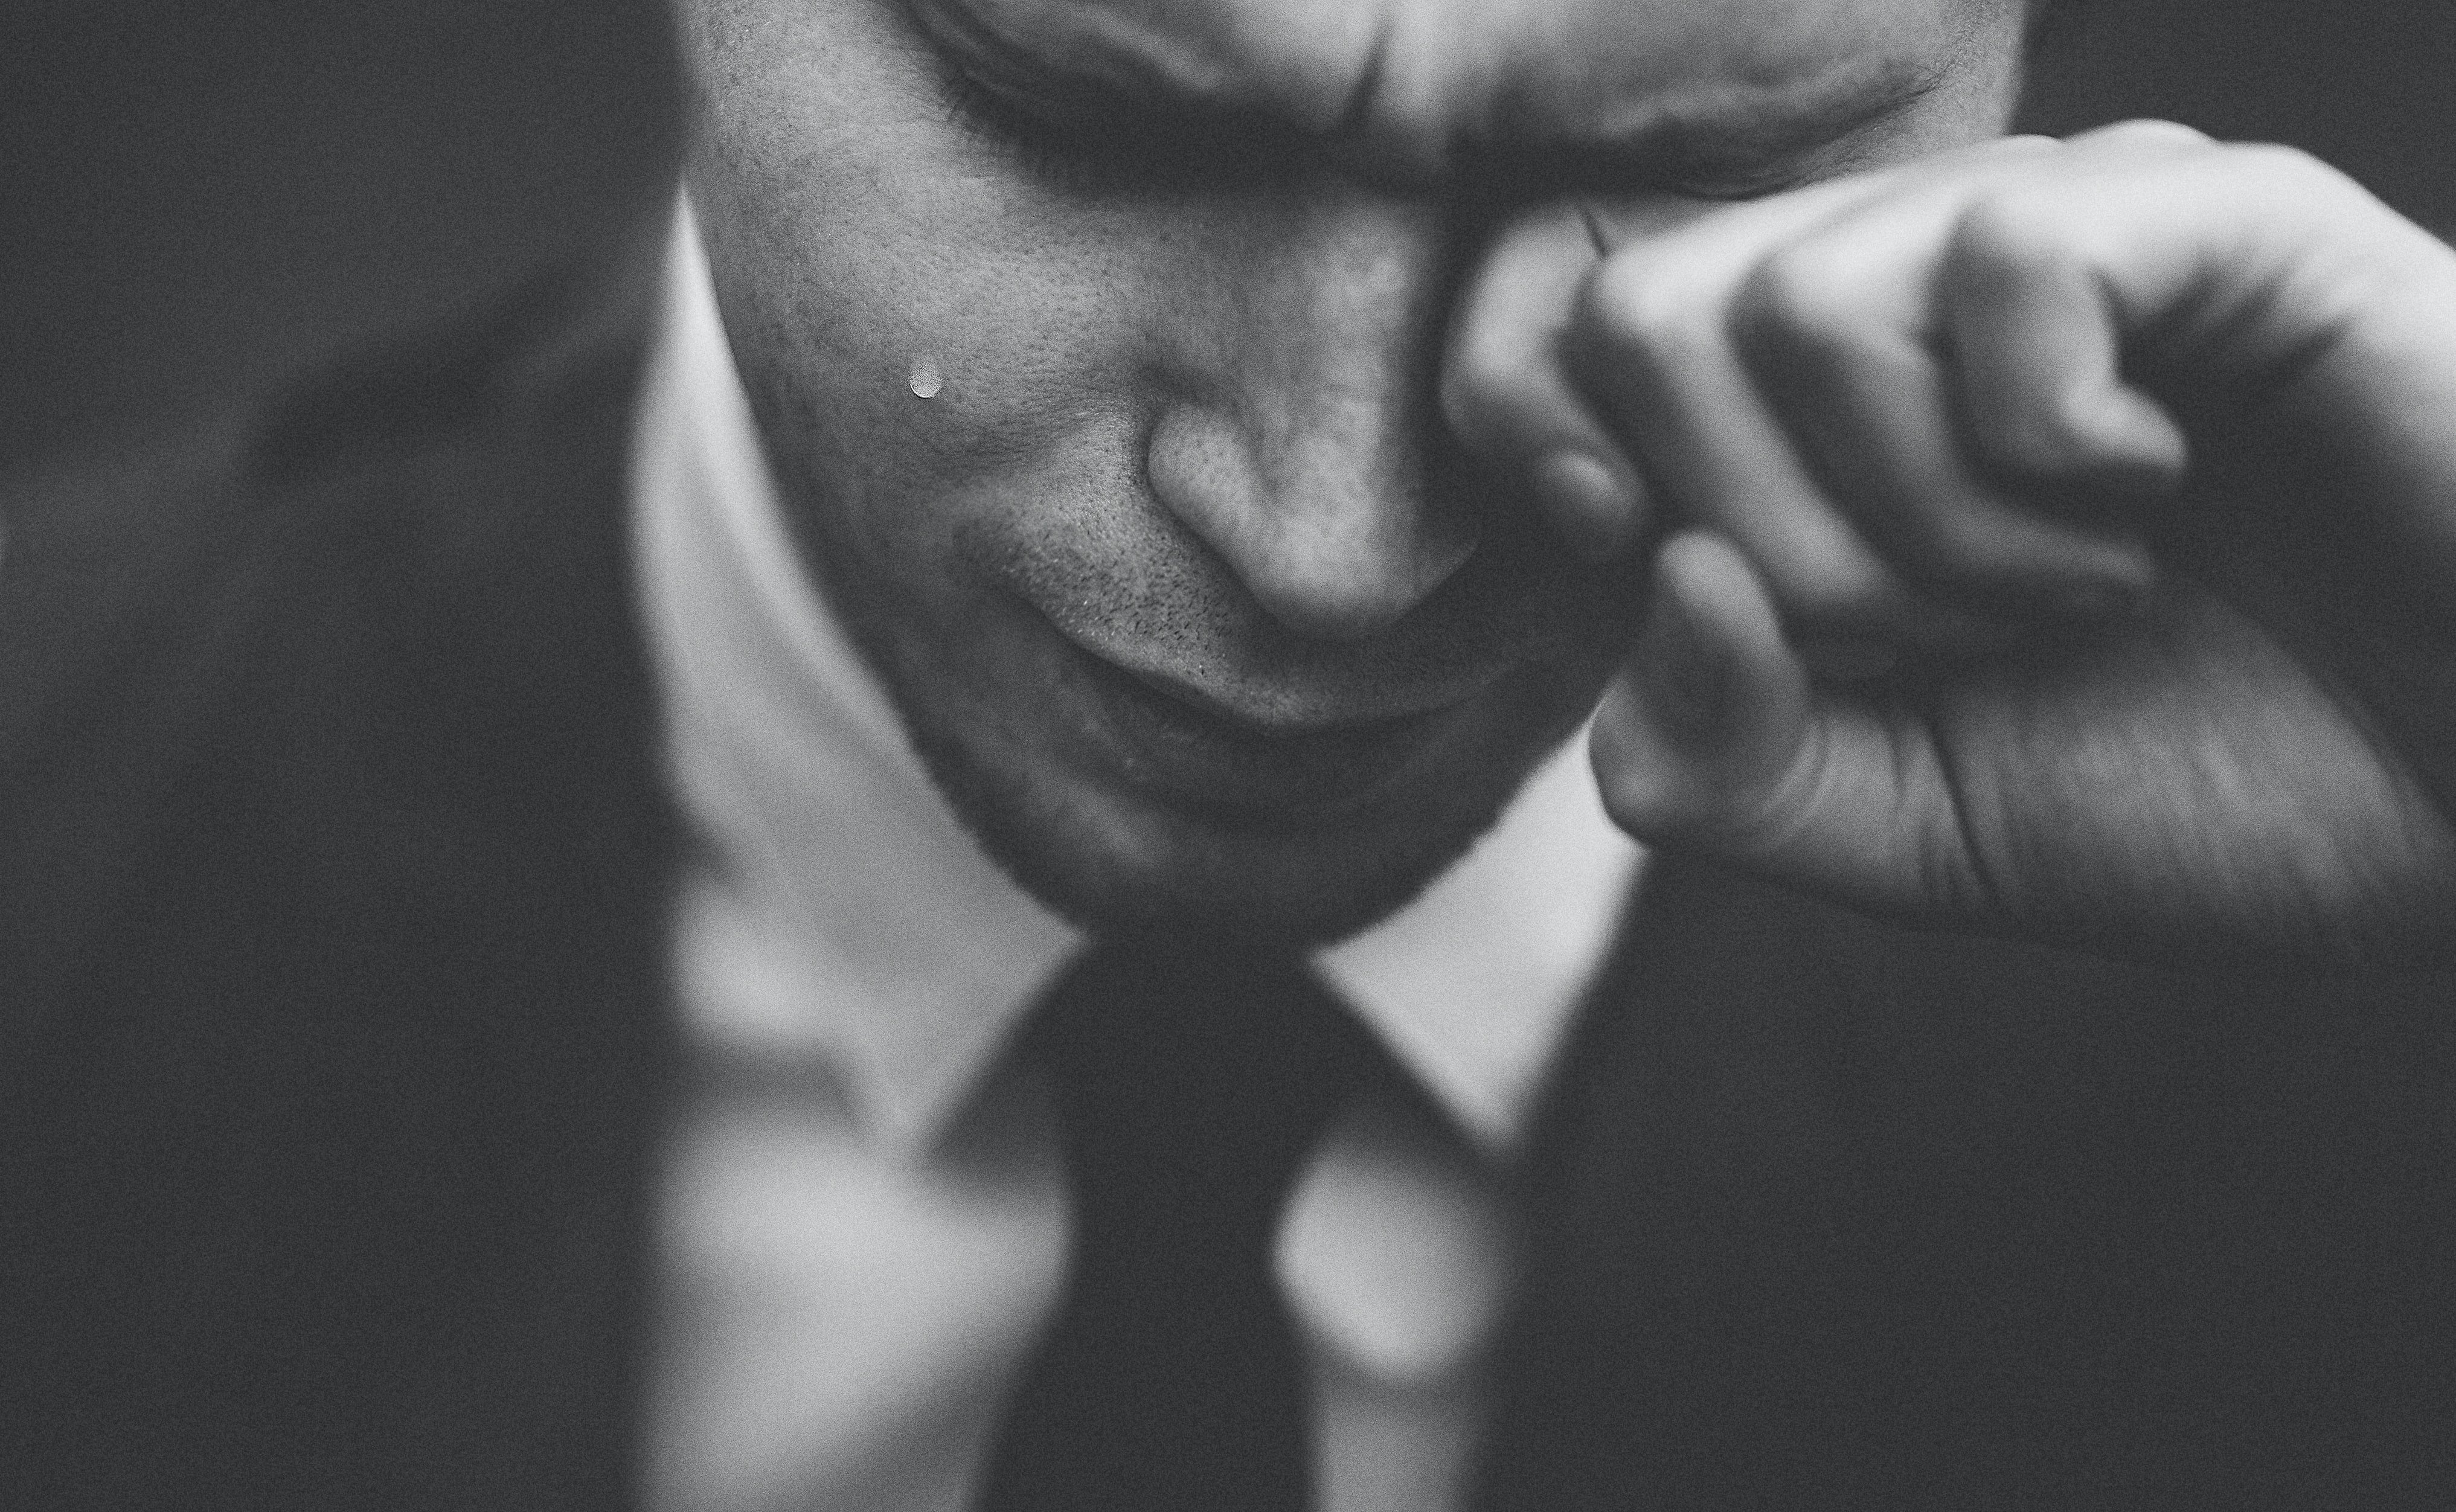 The sadness followed Victor throughout his life. | Source: Unsplash